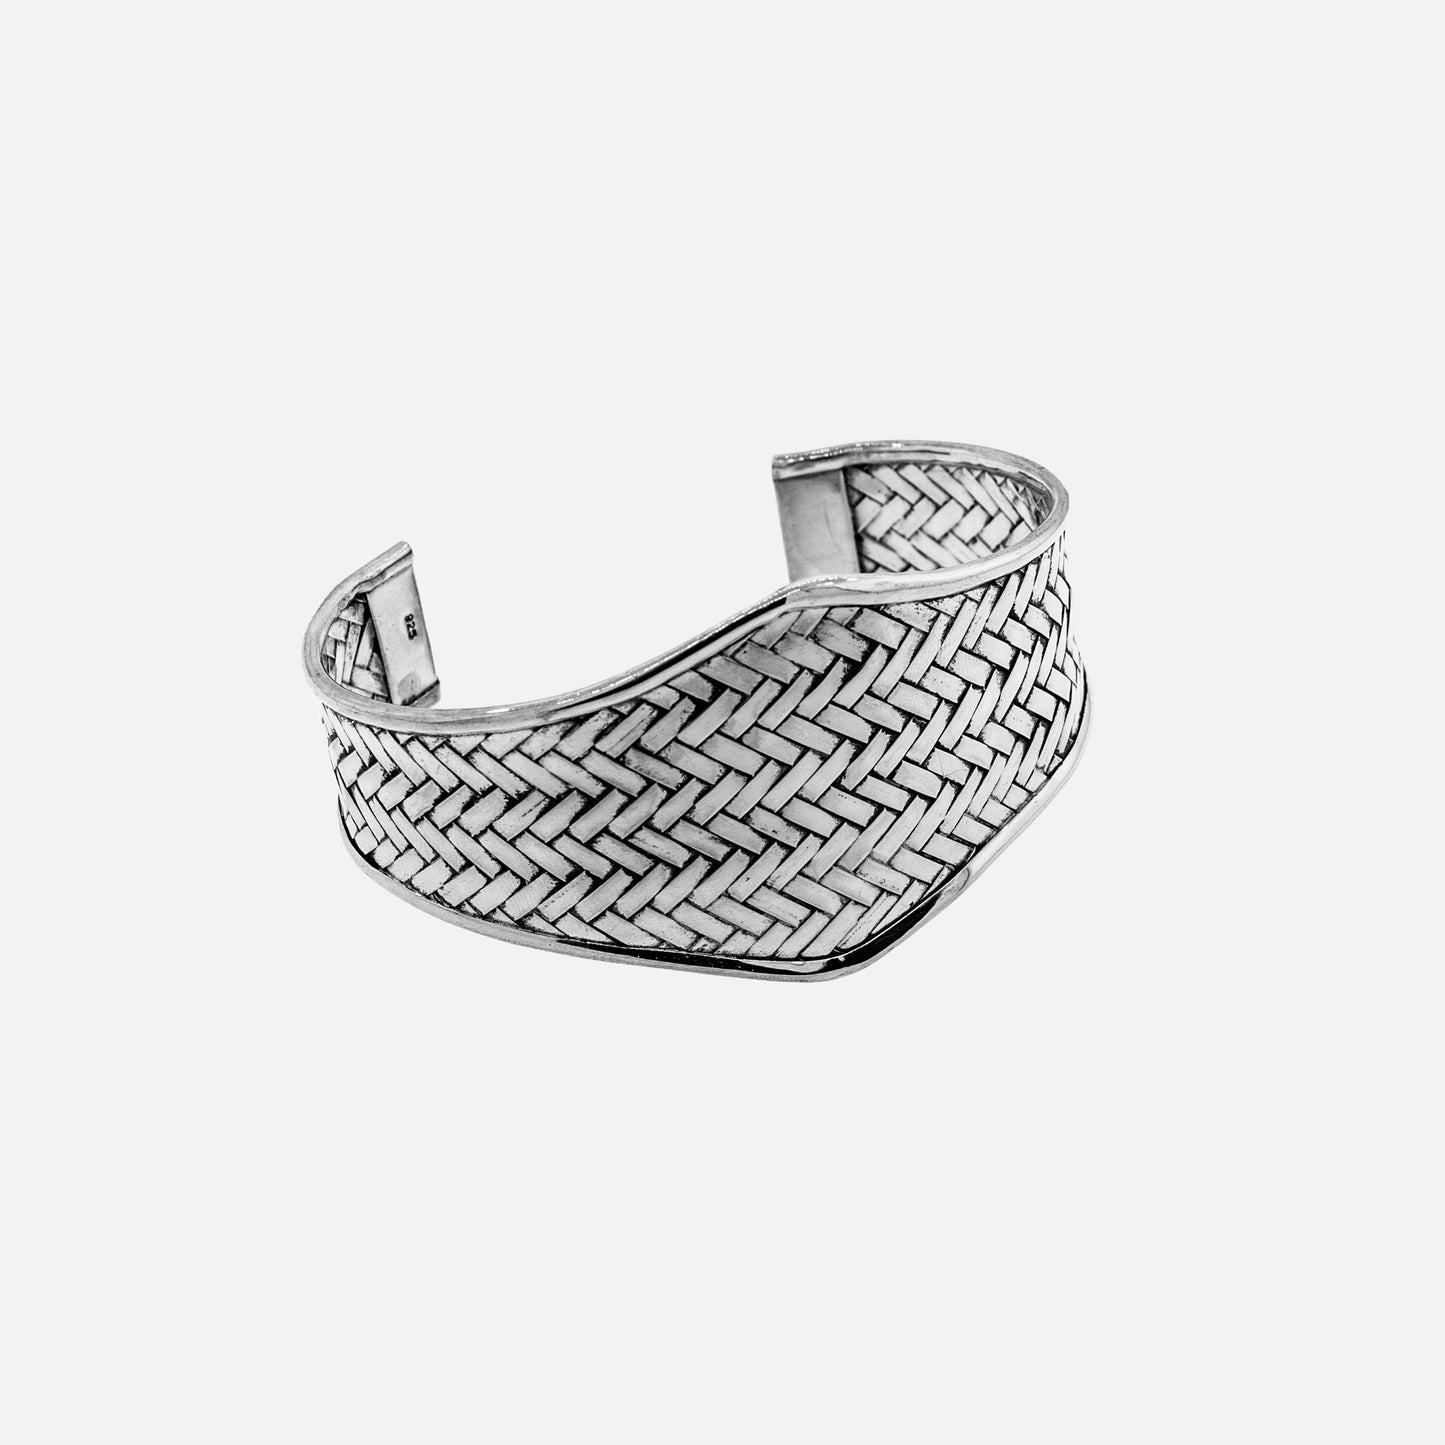 
                  
                    A Super Silver Wide Diamond Shaped Basket Weave cuff bracelet with a large basket weave pattern on a white background.
                  
                